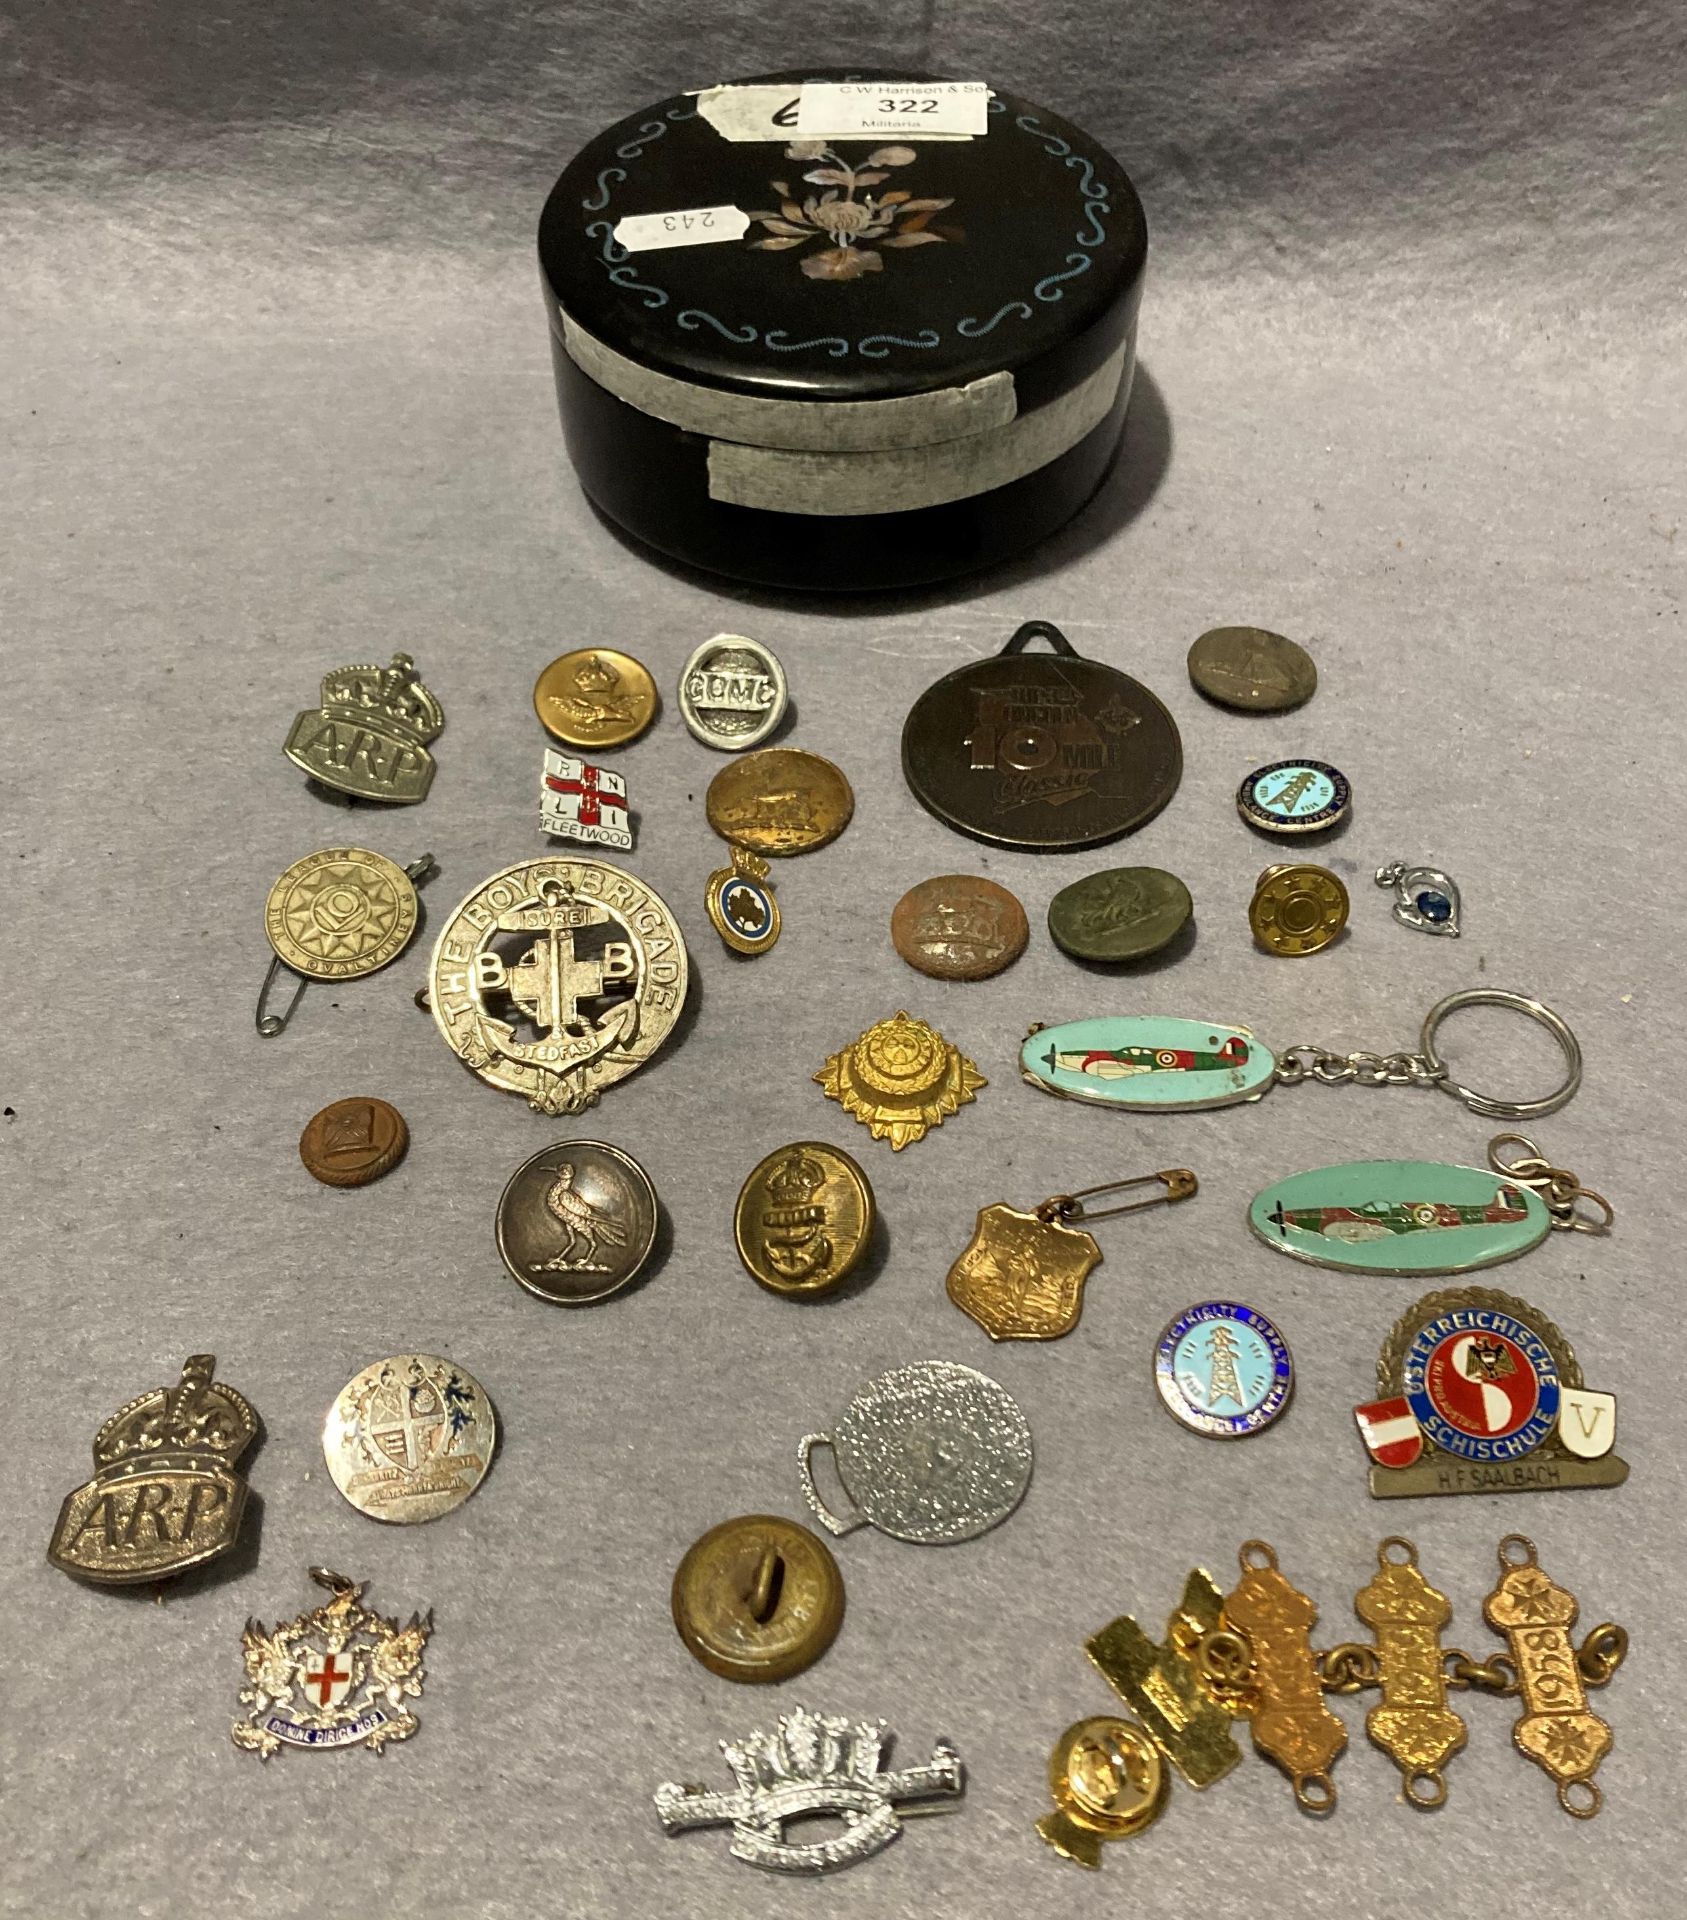 Contents to black mother of pearl inlaid box - assorted military buttons,